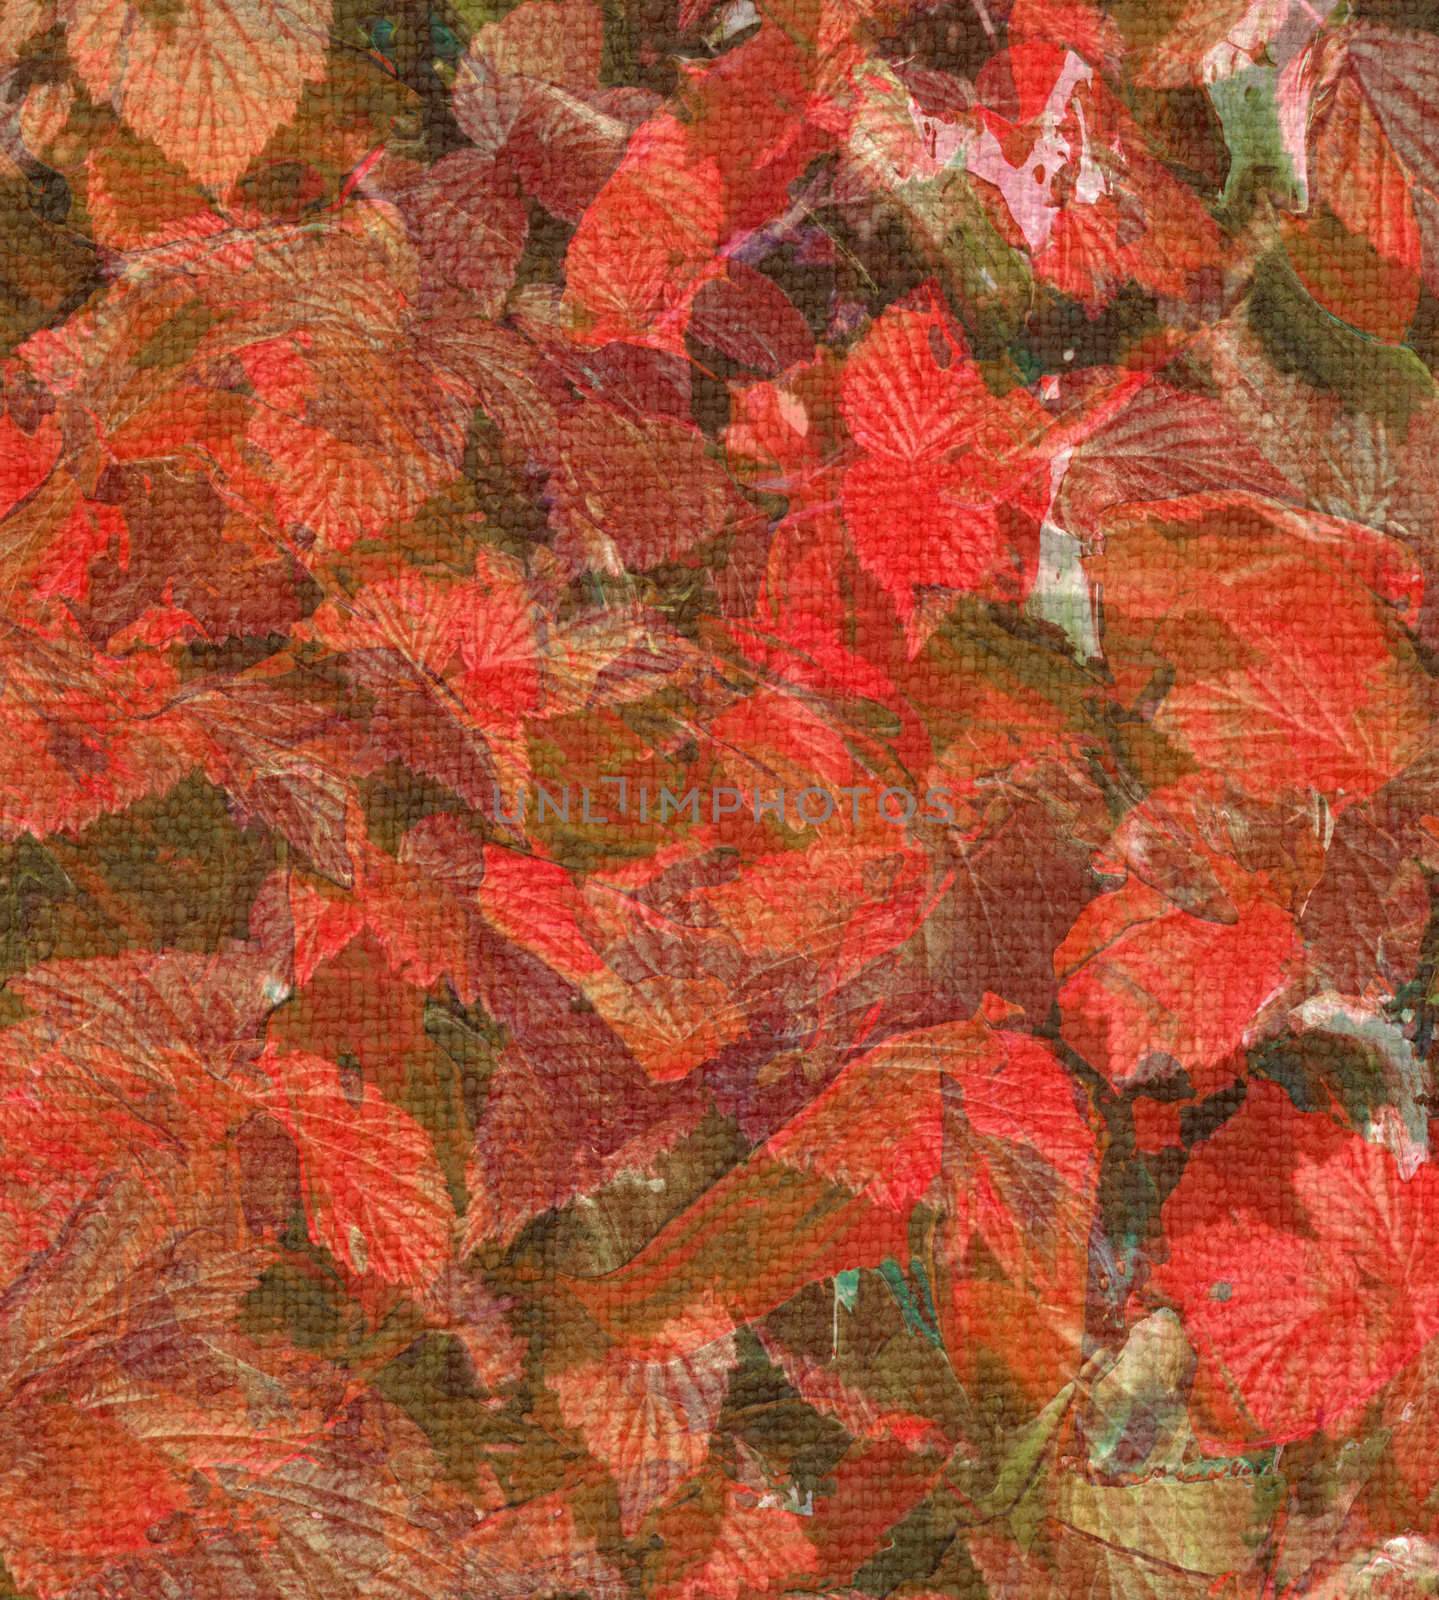 Leaves on a canvas by alexcoolok